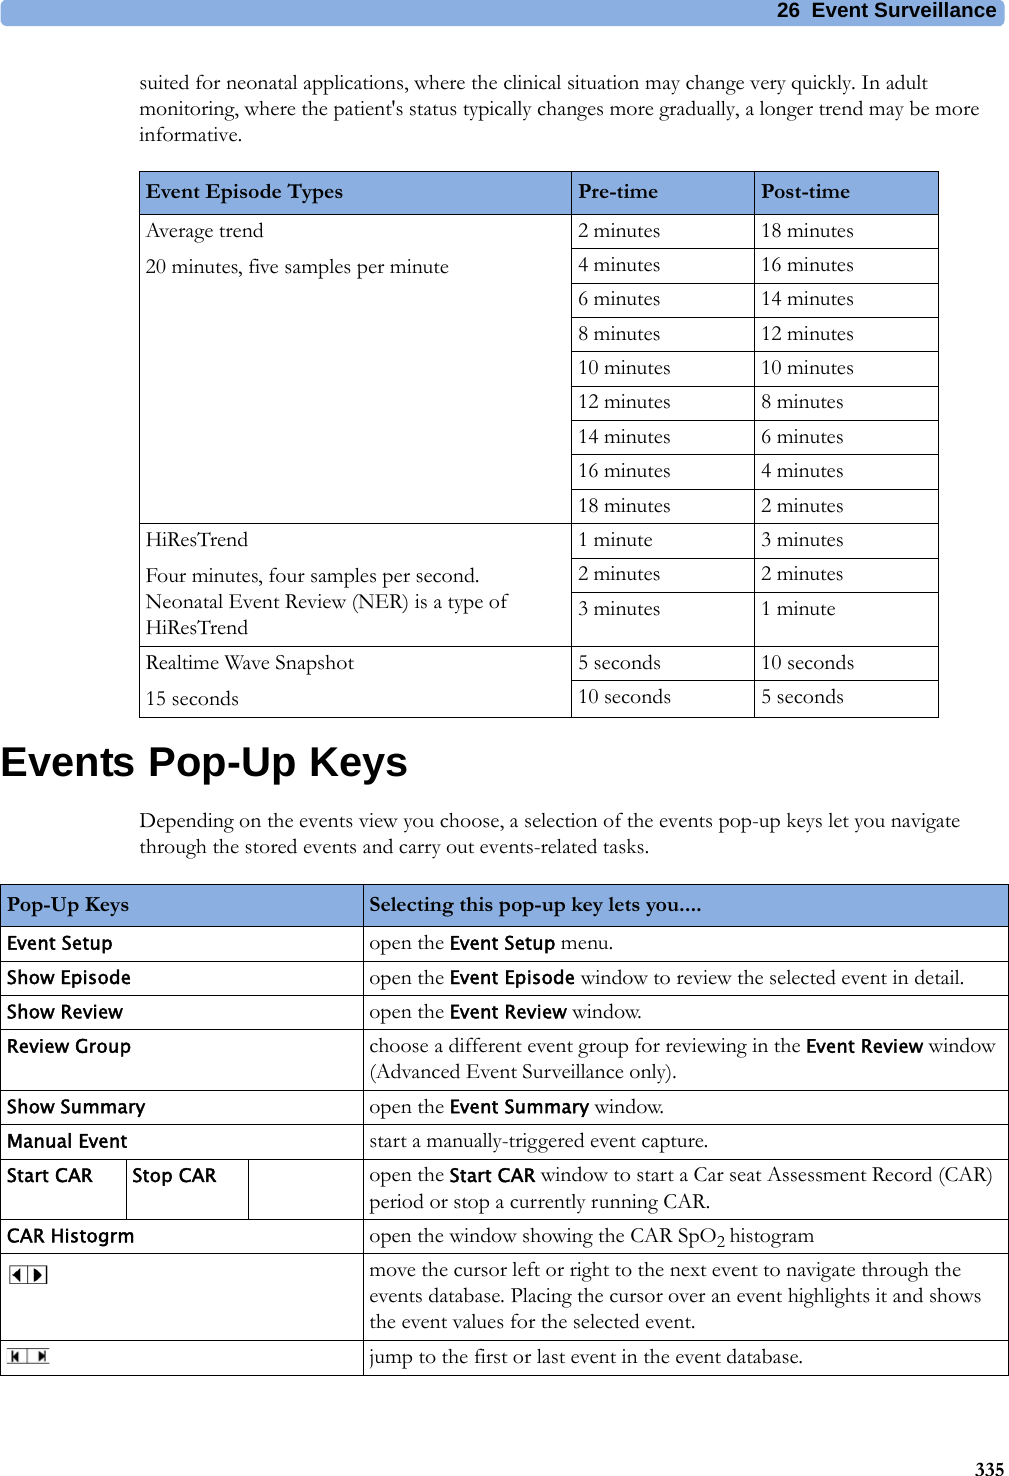 26 Event Surveillance335suited for neonatal applications, where the clinical situation may change very quickly. In adult monitoring, where the patient&apos;s status typically changes more gradually, a longer trend may be more informative.Events Pop-Up KeysDepending on the events view you choose, a selection of the events pop-up keys let you navigate through the stored events and carry out events-related tasks.Event Episode Types Pre-time Post-timeAverage trend20 minutes, five samples per minute2 minutes 18 minutes4 minutes 16 minutes6 minutes 14 minutes8 minutes 12 minutes10 minutes 10 minutes12 minutes 8 minutes14 minutes 6 minutes16 minutes 4 minutes18 minutes 2 minutesHiResTrendFour minutes, four samples per second.Neonatal Event Review (NER) is a type of HiResTrend1 minute 3 minutes2 minutes 2 minutes3 minutes 1 minuteRealtime Wave Snapshot15 seconds5 seconds 10 seconds10 seconds 5 secondsPop-Up Keys Selecting this pop-up key lets you....Event Setup open the Event Setup menu.Show Episode open the Event Episode window to review the selected event in detail.Show Review open the Event Review window.Review Group choose a different event group for reviewing in the Event Review window (Advanced Event Surveillance only).Show Summary open the Event Summary window.Manual Event start a manually-triggered event capture.Start CAR Stop CAR open the Start CAR window to start a Car seat Assessment Record (CAR) period or stop a currently running CAR.CAR Histogrm open the window showing the CAR SpO2 histogrammove the cursor left or right to the next event to navigate through the events database. Placing the cursor over an event highlights it and shows the event values for the selected event.jump to the first or last event in the event database.